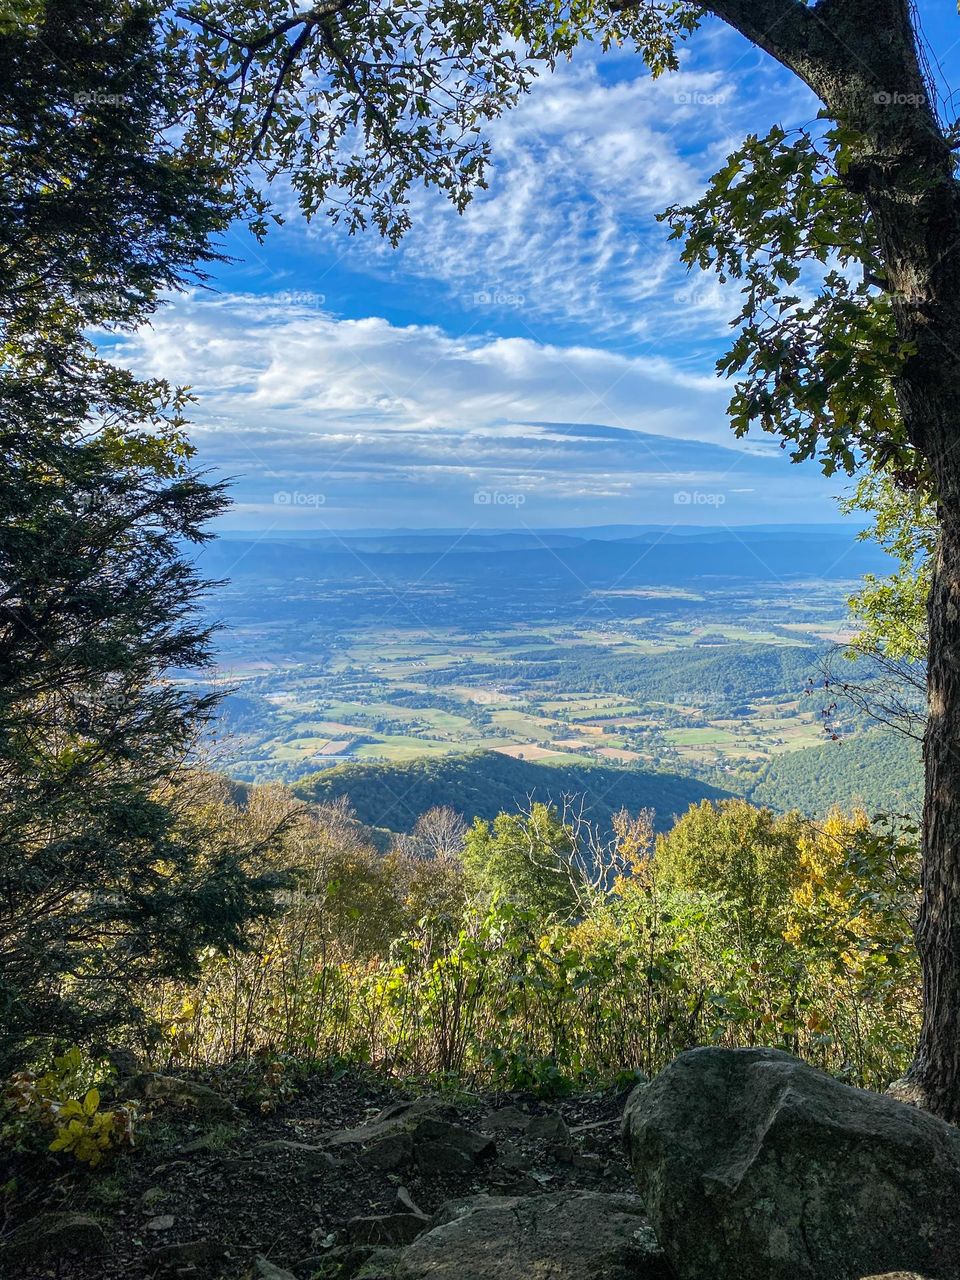 Framed by the natural surrounding, the Blue Ridge Mountains and the valley below.  Beautiful scenic view on the way to the top of the Stony Man Summit in Shenandoah National Park in Virginia. 